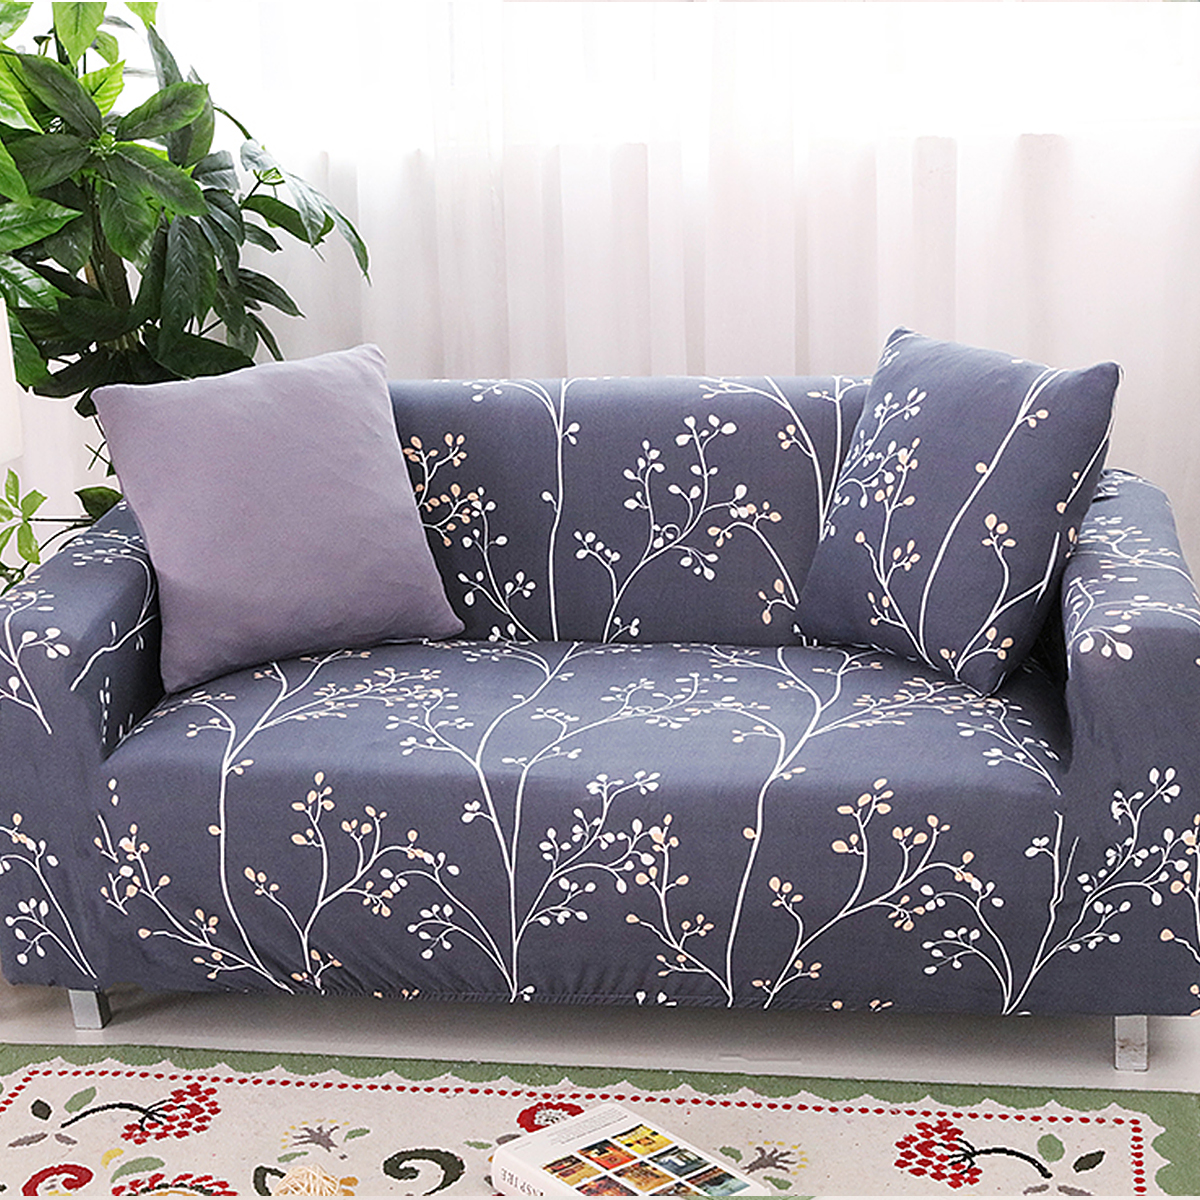 4 Seat Home Elastic Fabric Sofa Cover Sectional/Corner Couch Covers Fit Decor US eBay